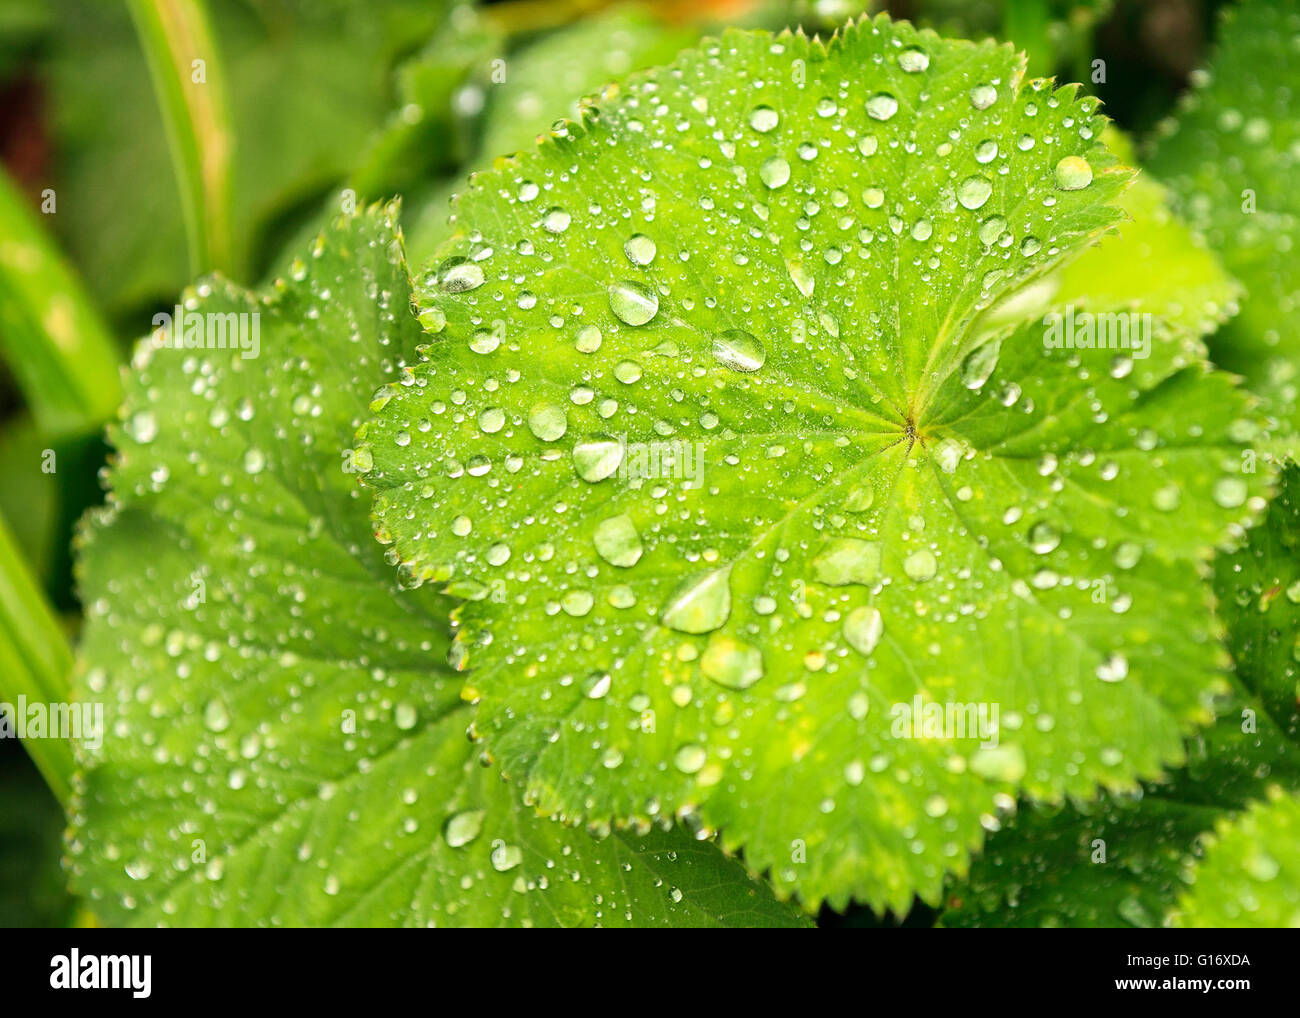 Alchemilla Vulgaris aka Lady's Mantle covered in rain drops.  Alchemilla Vulgaris aka Lady's Mantle, is an herbaceous perennial plant in Europe and Greenland  Model Release: No.  Property Release: No. Stock Photo